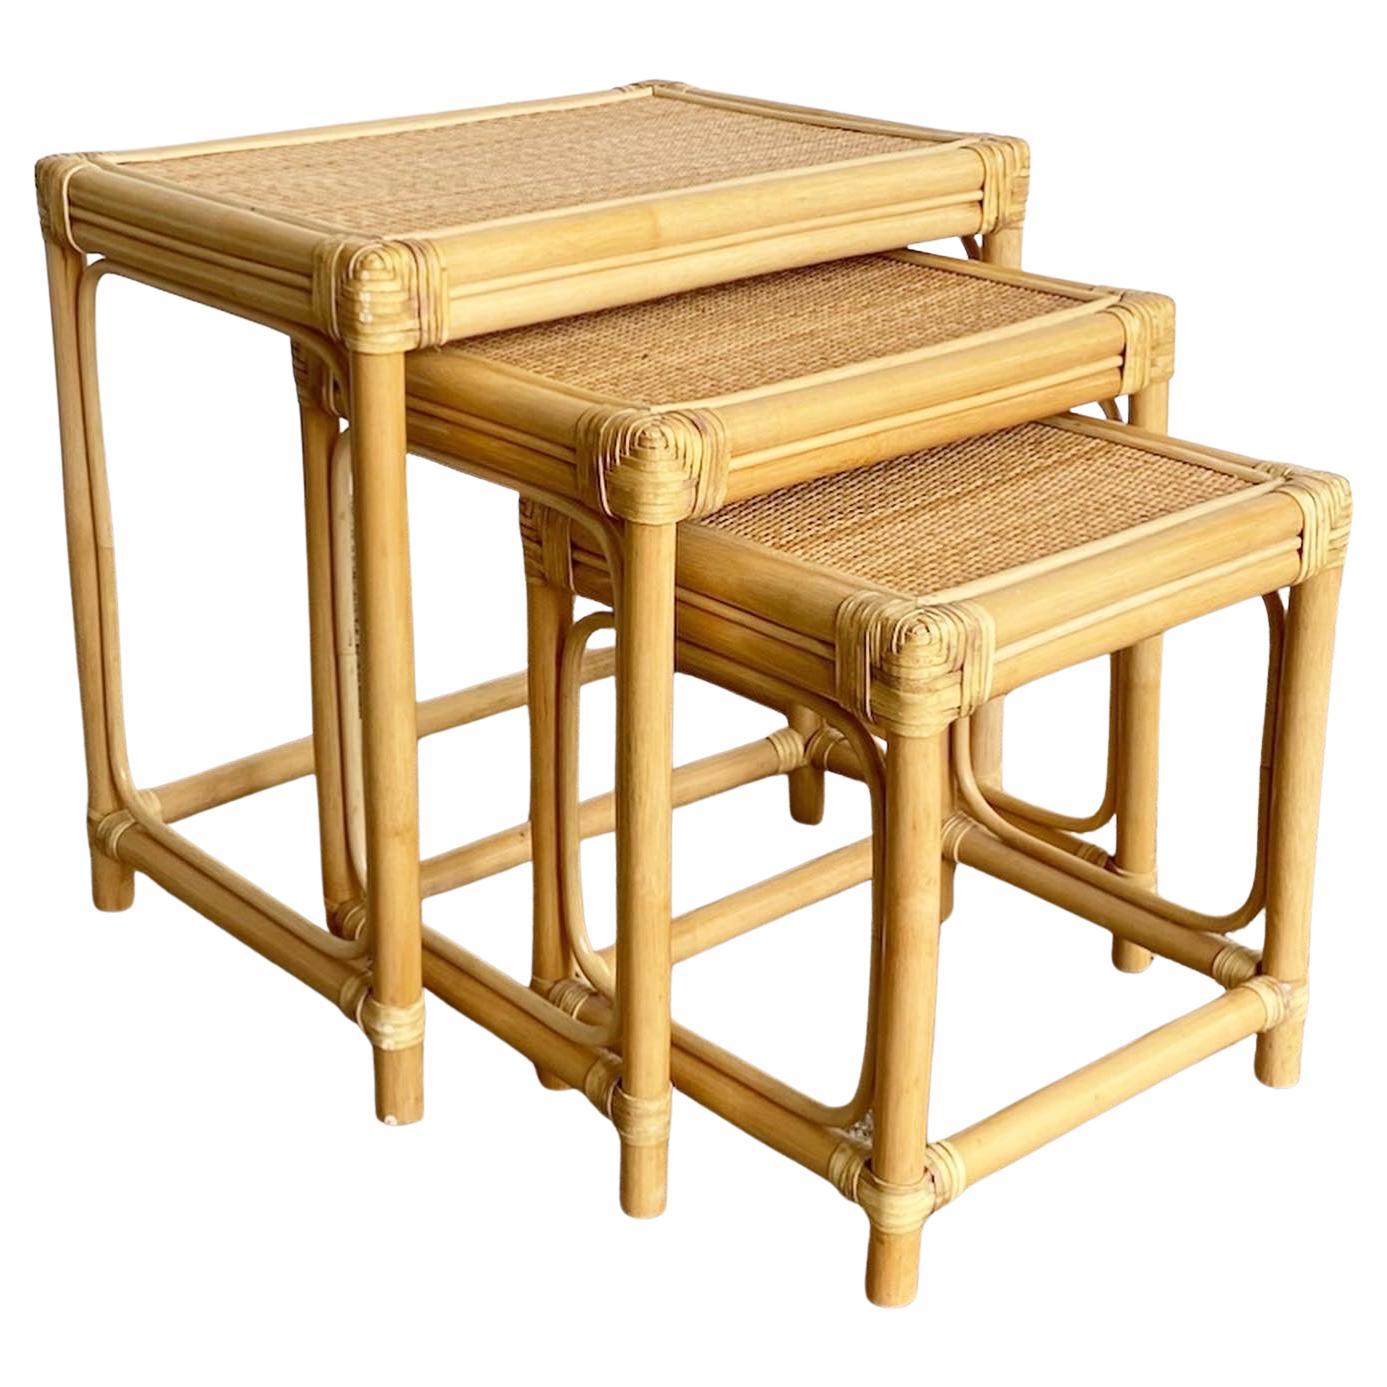 Boho Chic Bamboo Rattan and Wicker Nesting Tables, Set of 3 For Sale